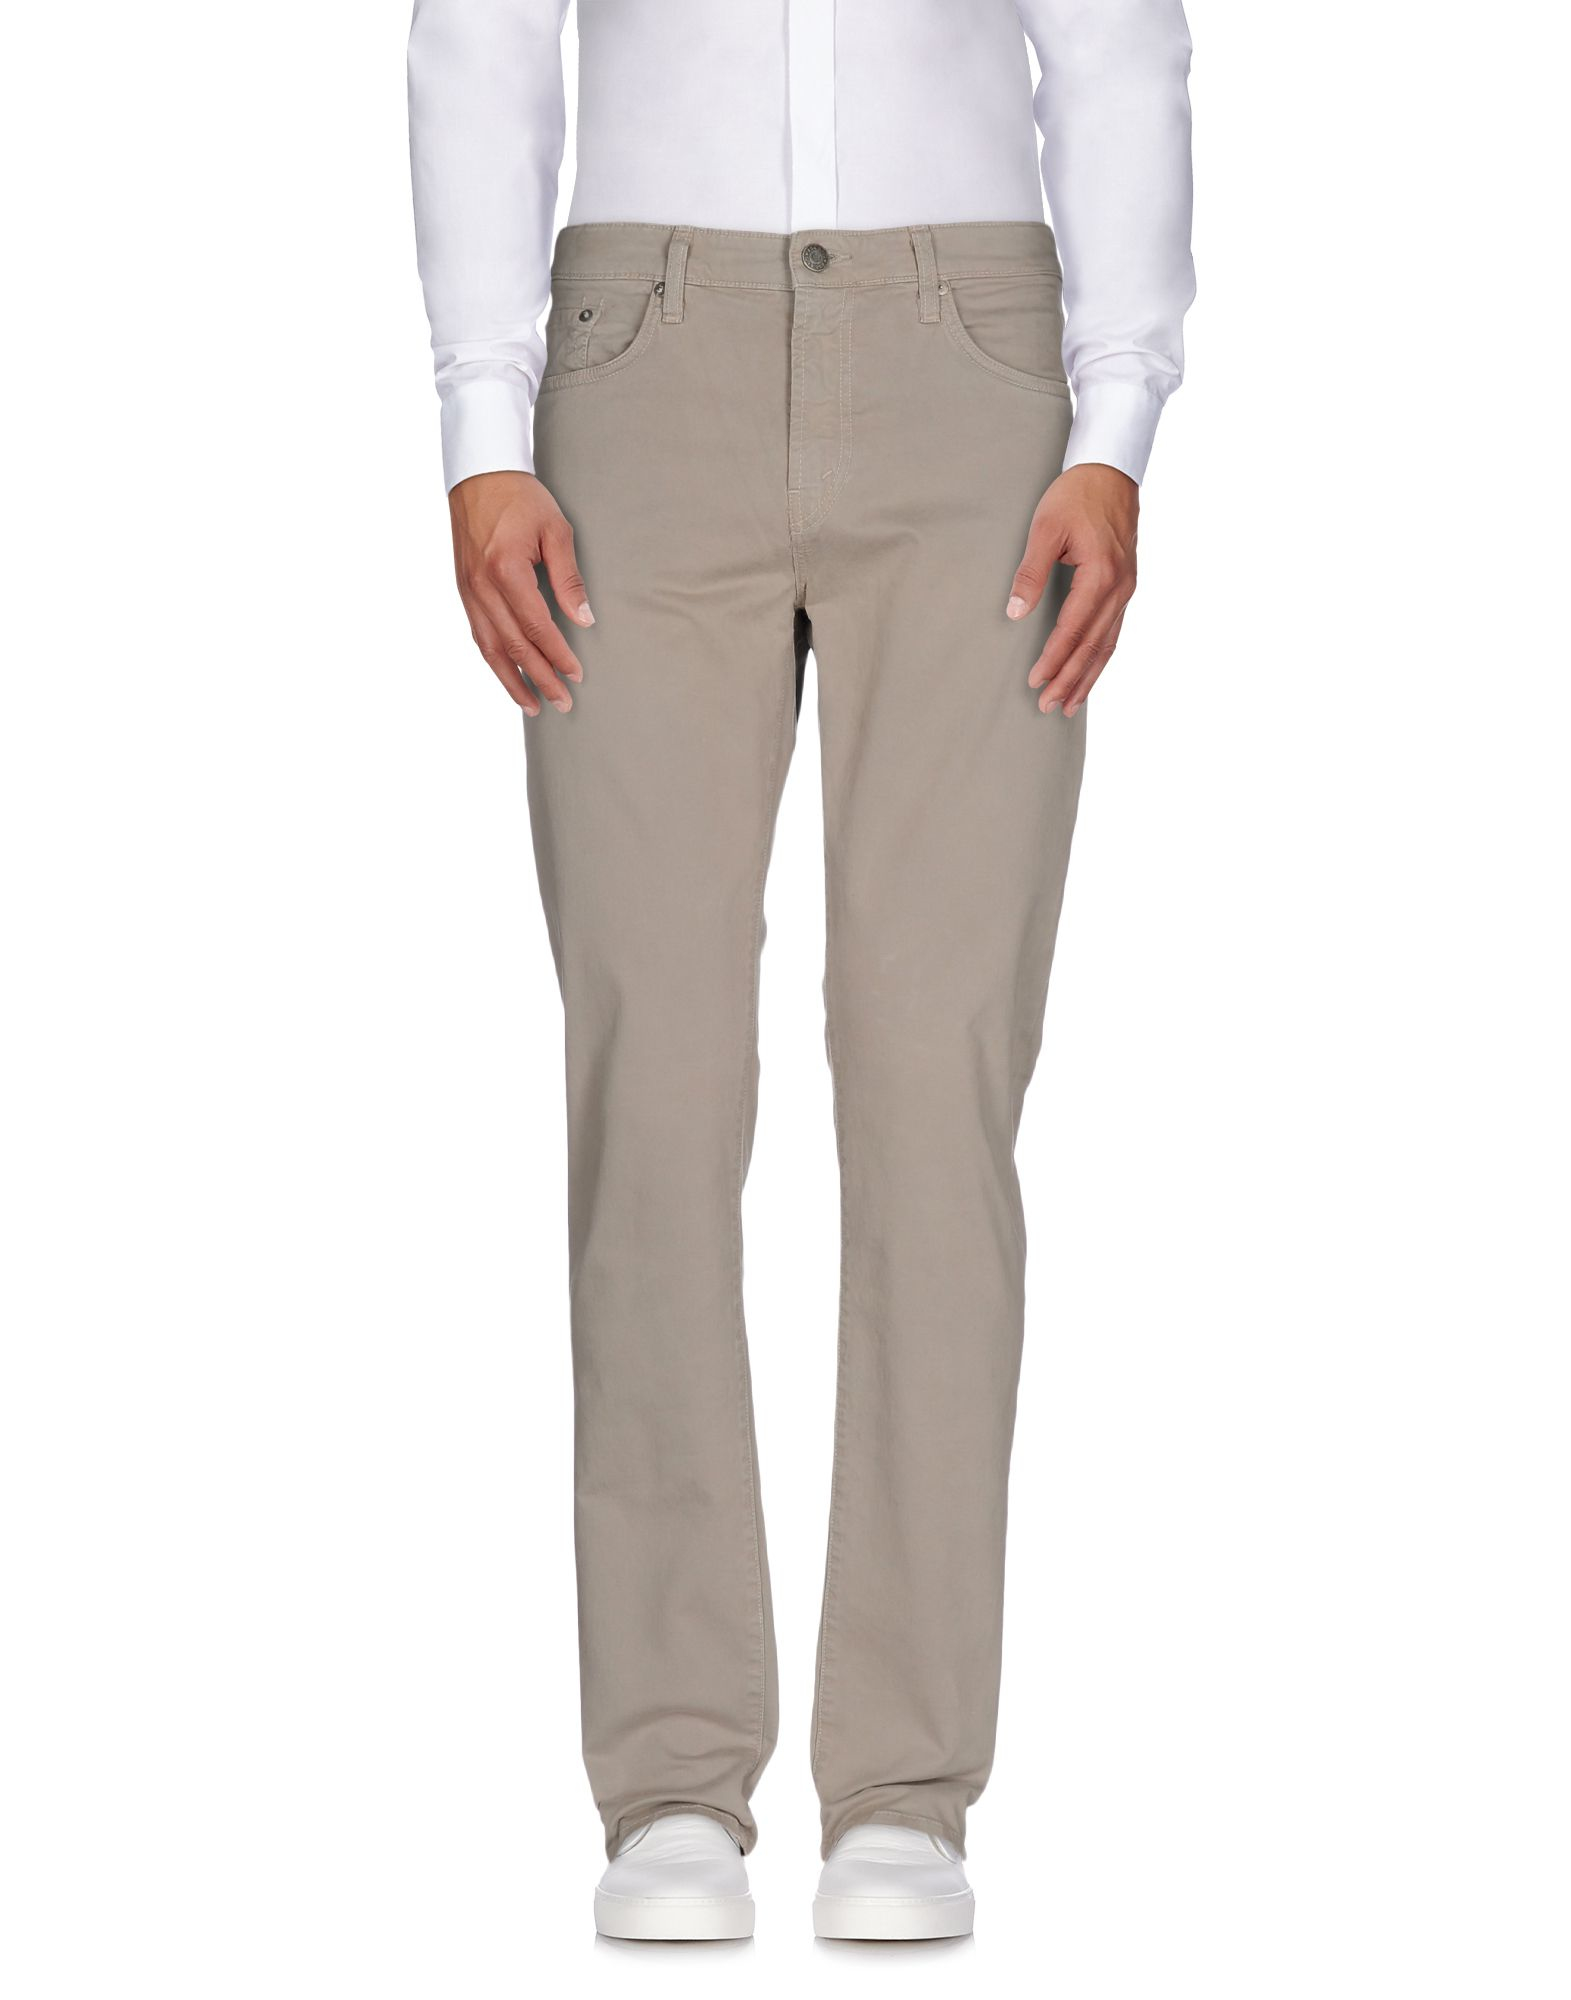 J brand Casual Trouser in Beige for Men (Dove grey) - Save 46% | Lyst